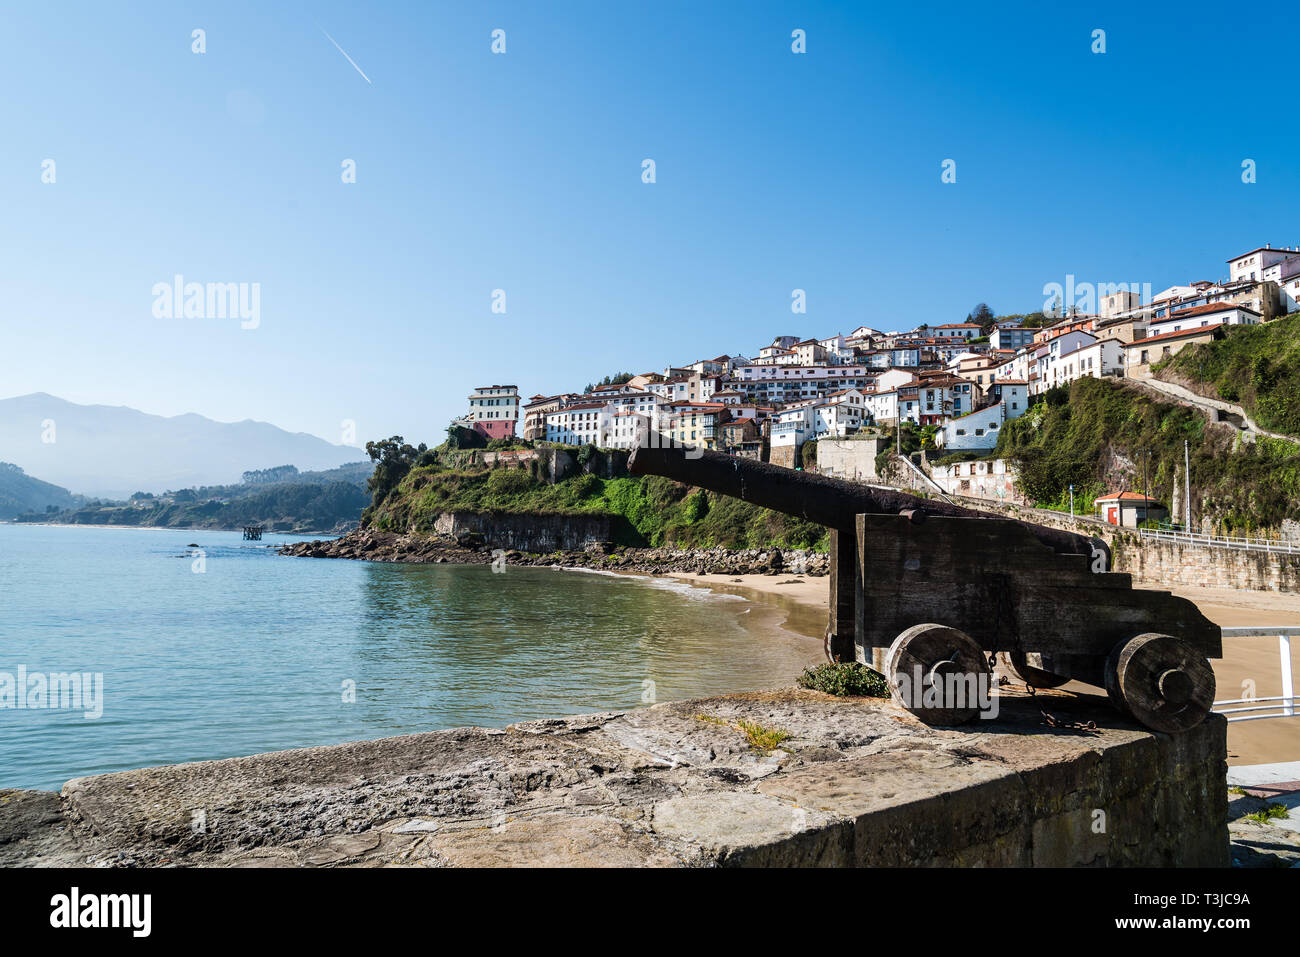 Scenic view of the beautiful fishing village of Lastres in Asturias. Old gun on foreground Stock Photo